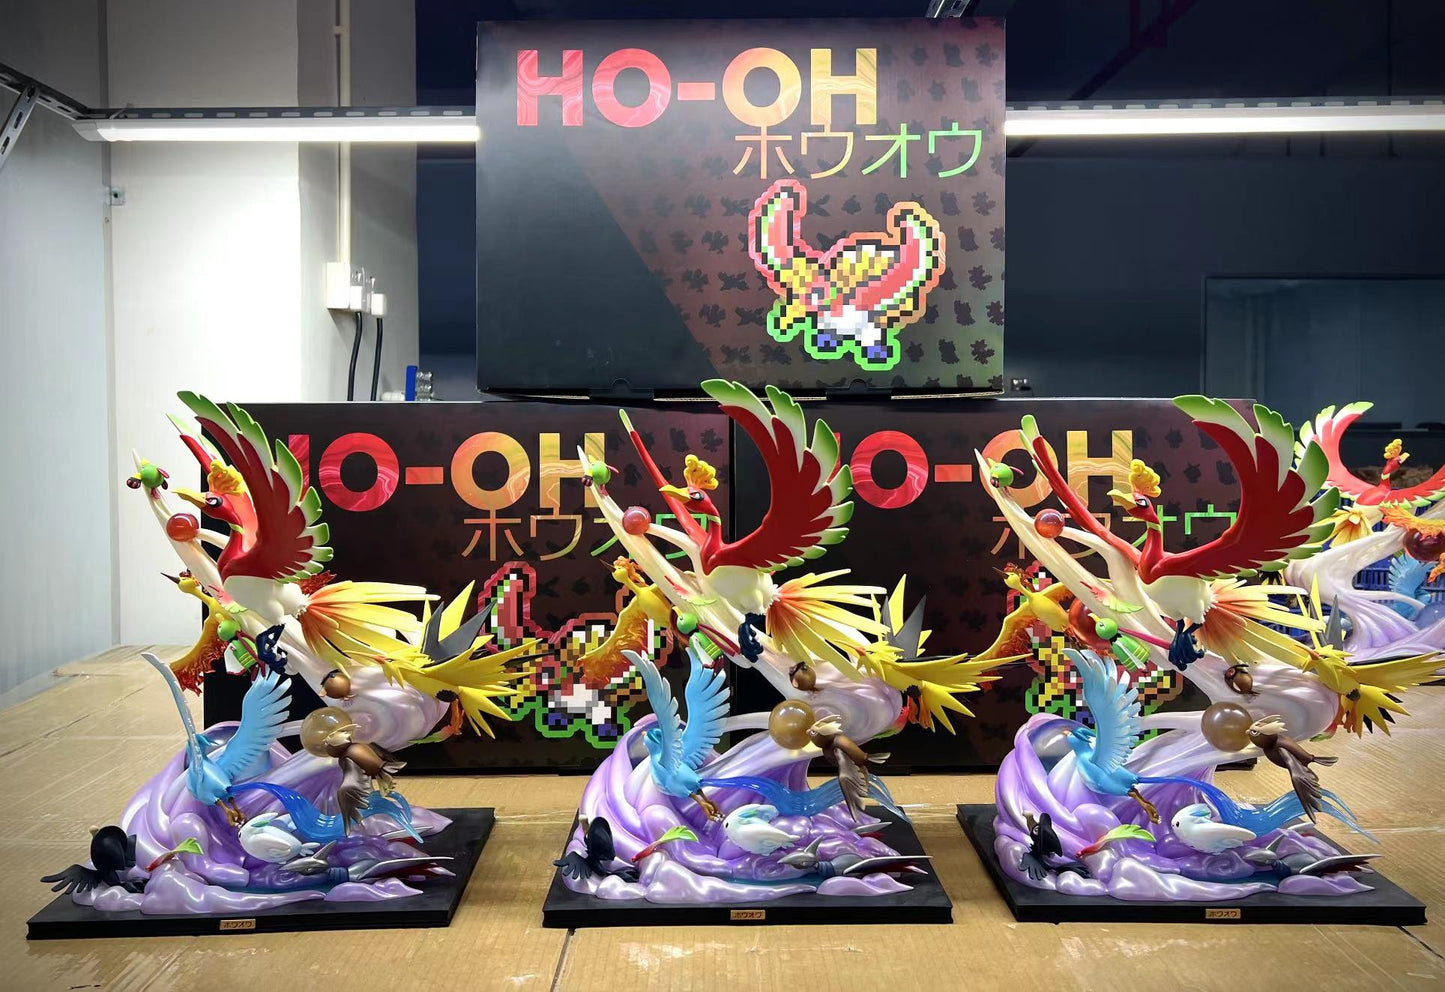 〖Sold Out〗Pokemon Birds Facing The Phoenix Model Statue Resin - PC House Studio